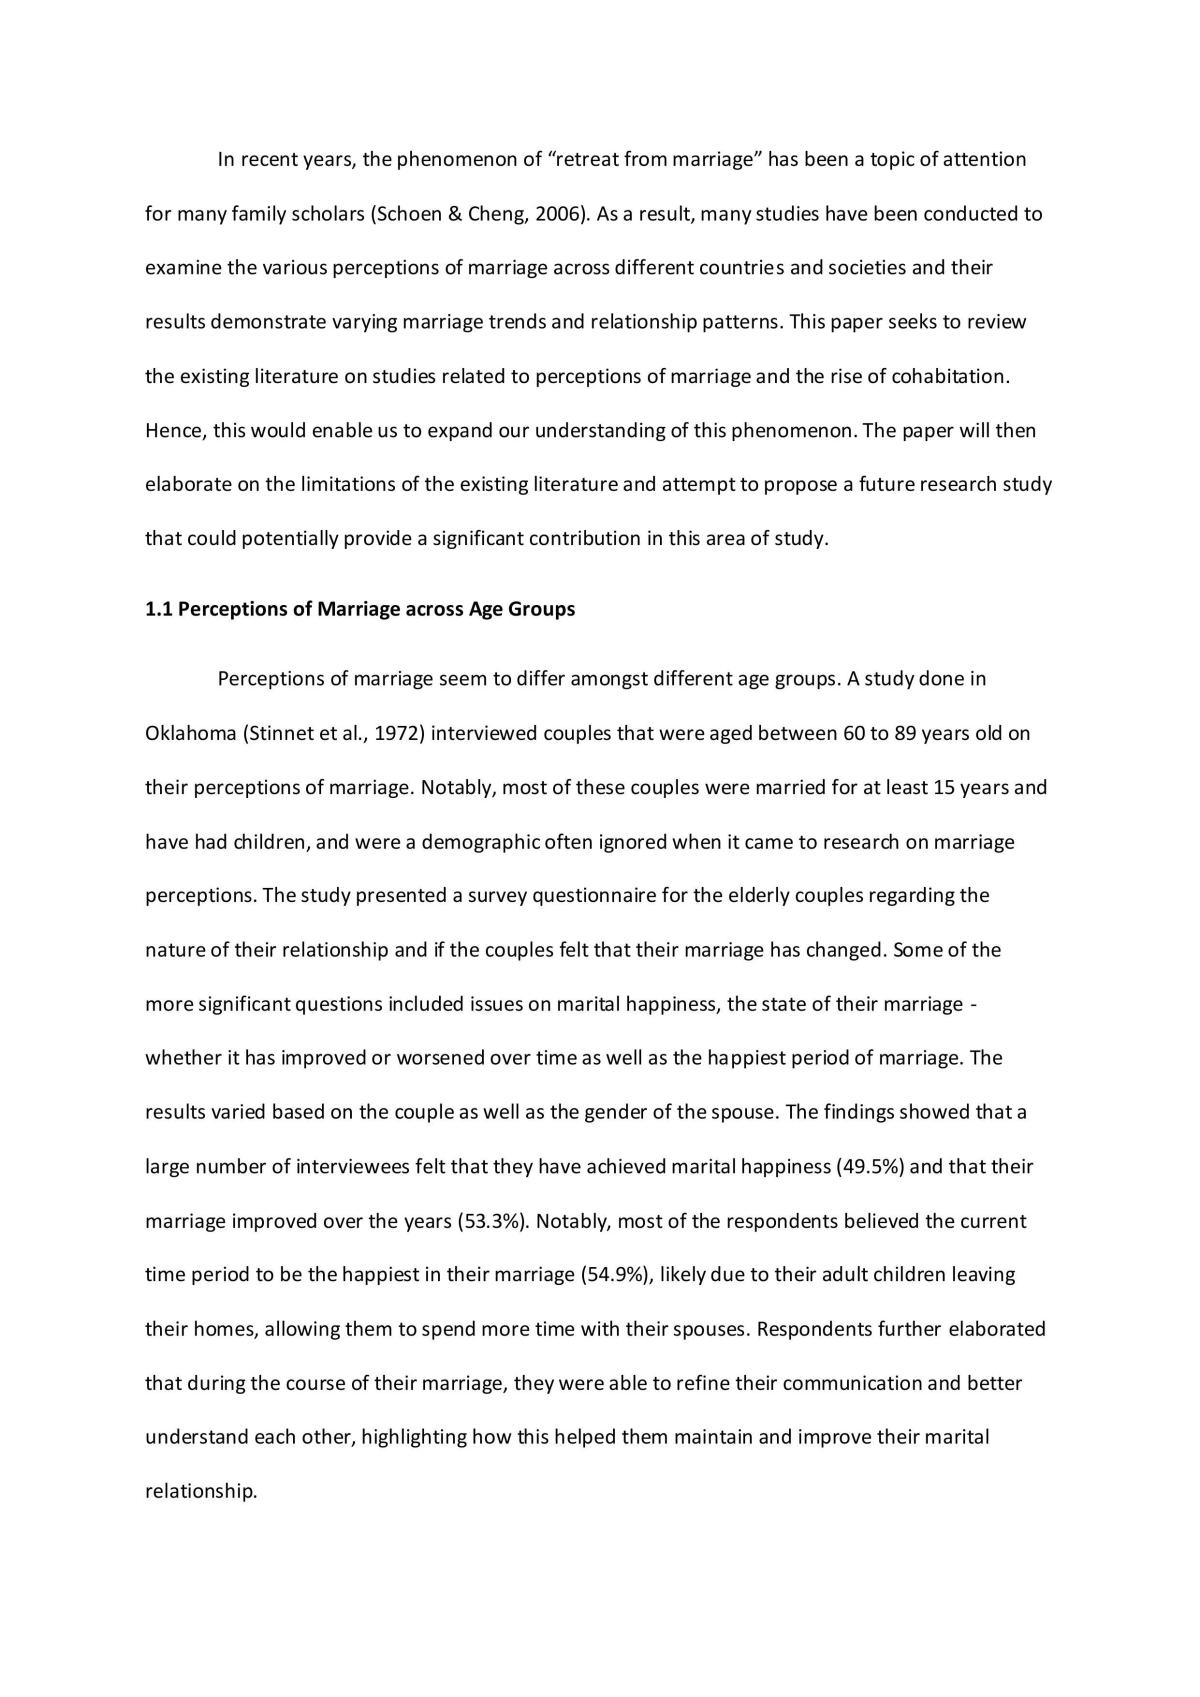 SC2205 Literature Review - Page 1